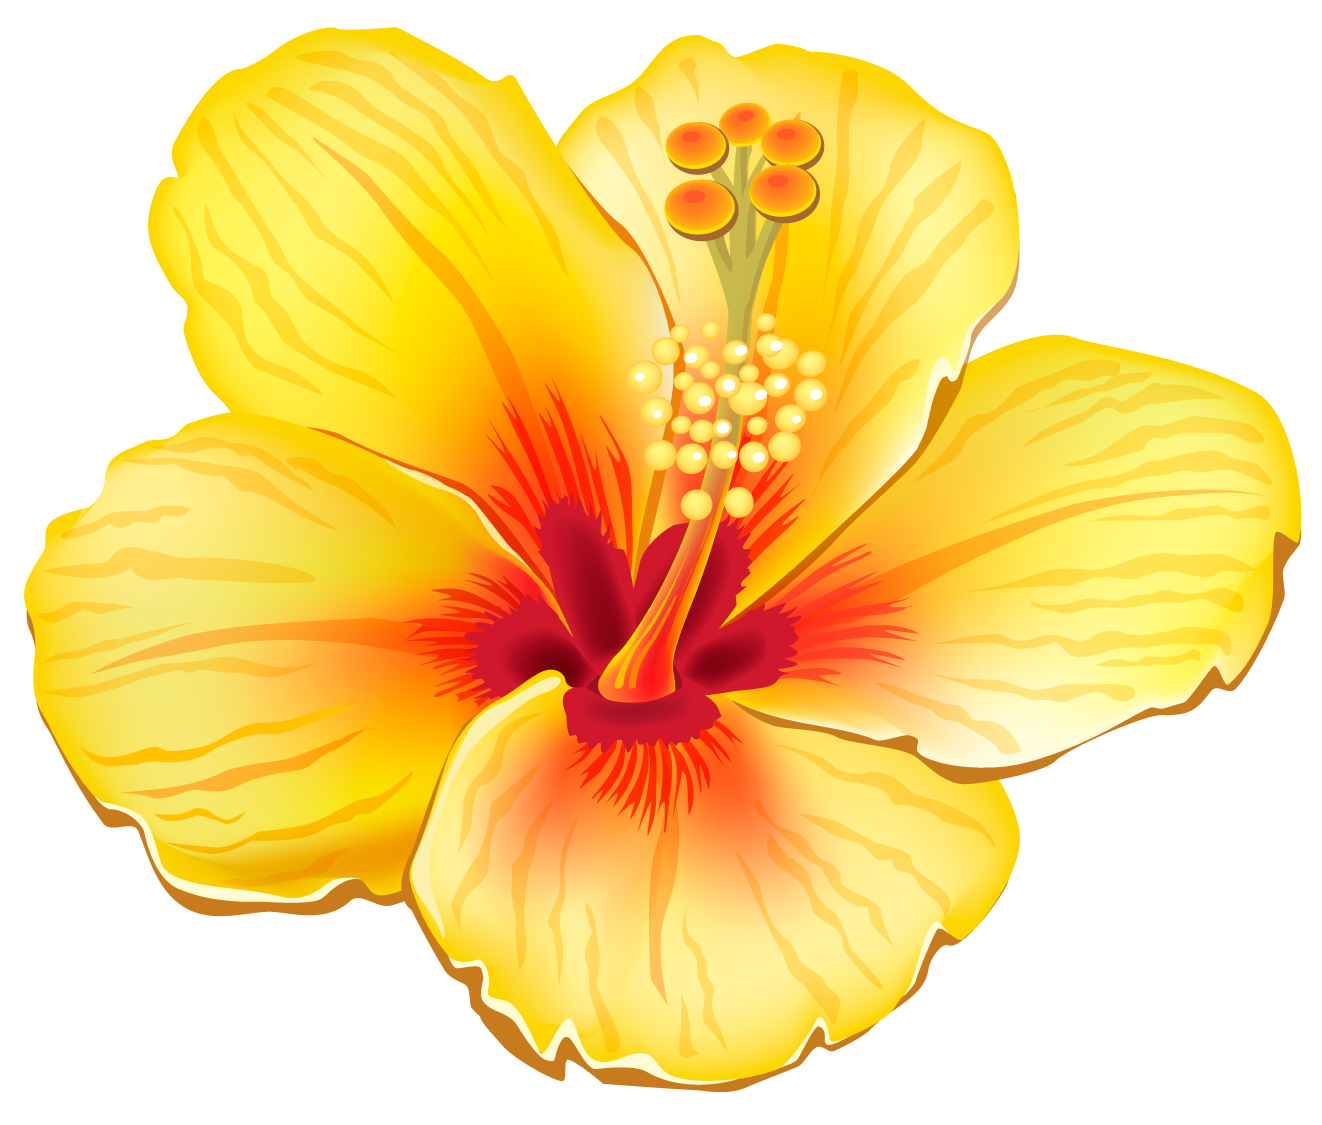 Flower Clip art - Tropical Flowers Cliparts png download - 1322*1125